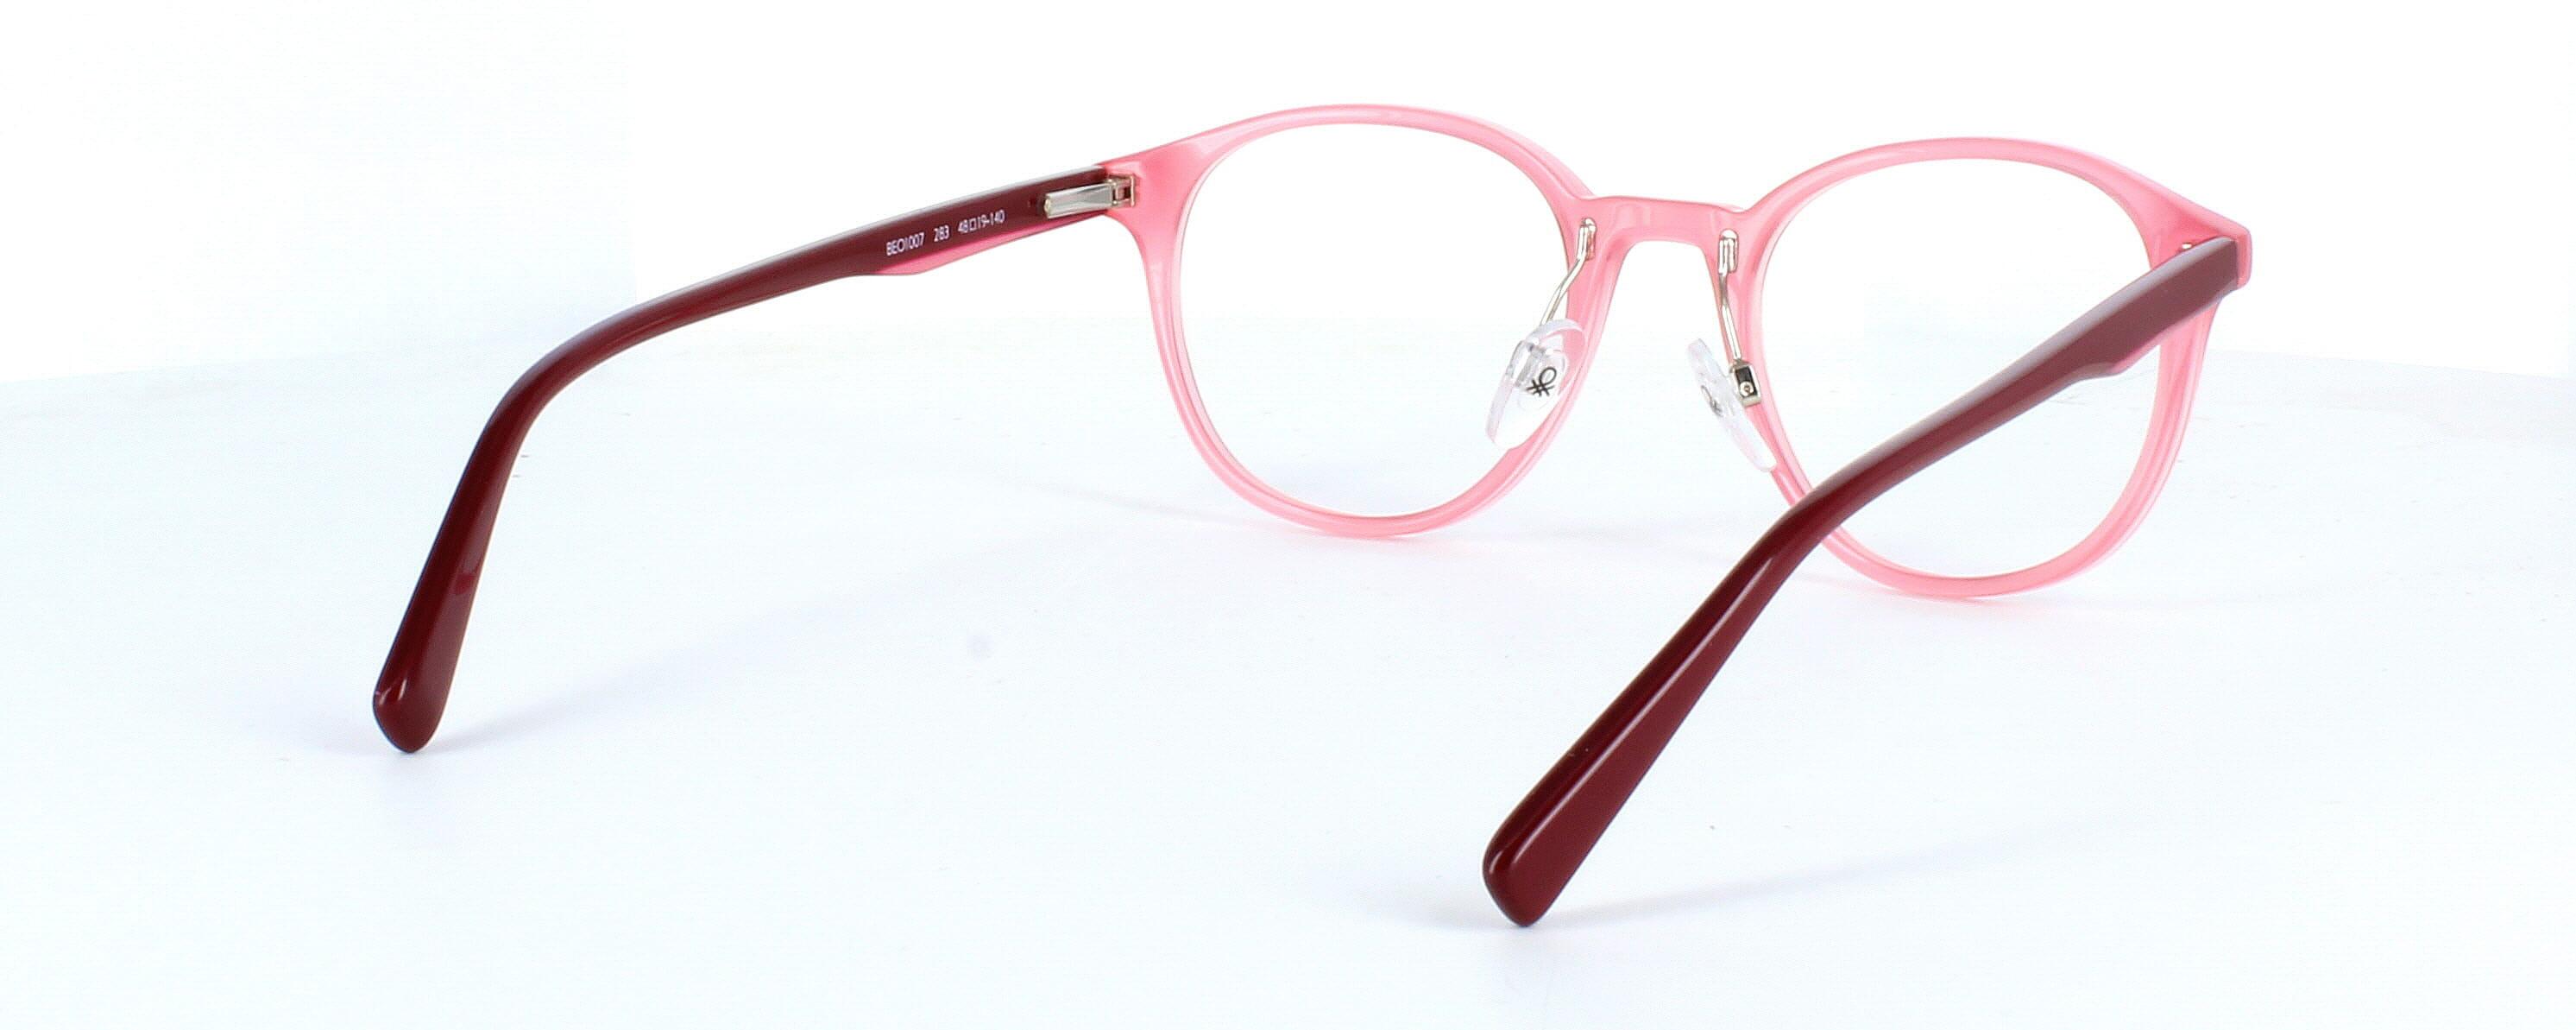 Benetton BEO1007 283 - Women's round plastic crystal pink glasses frame with sprung hinged burgundy arms - image view 5